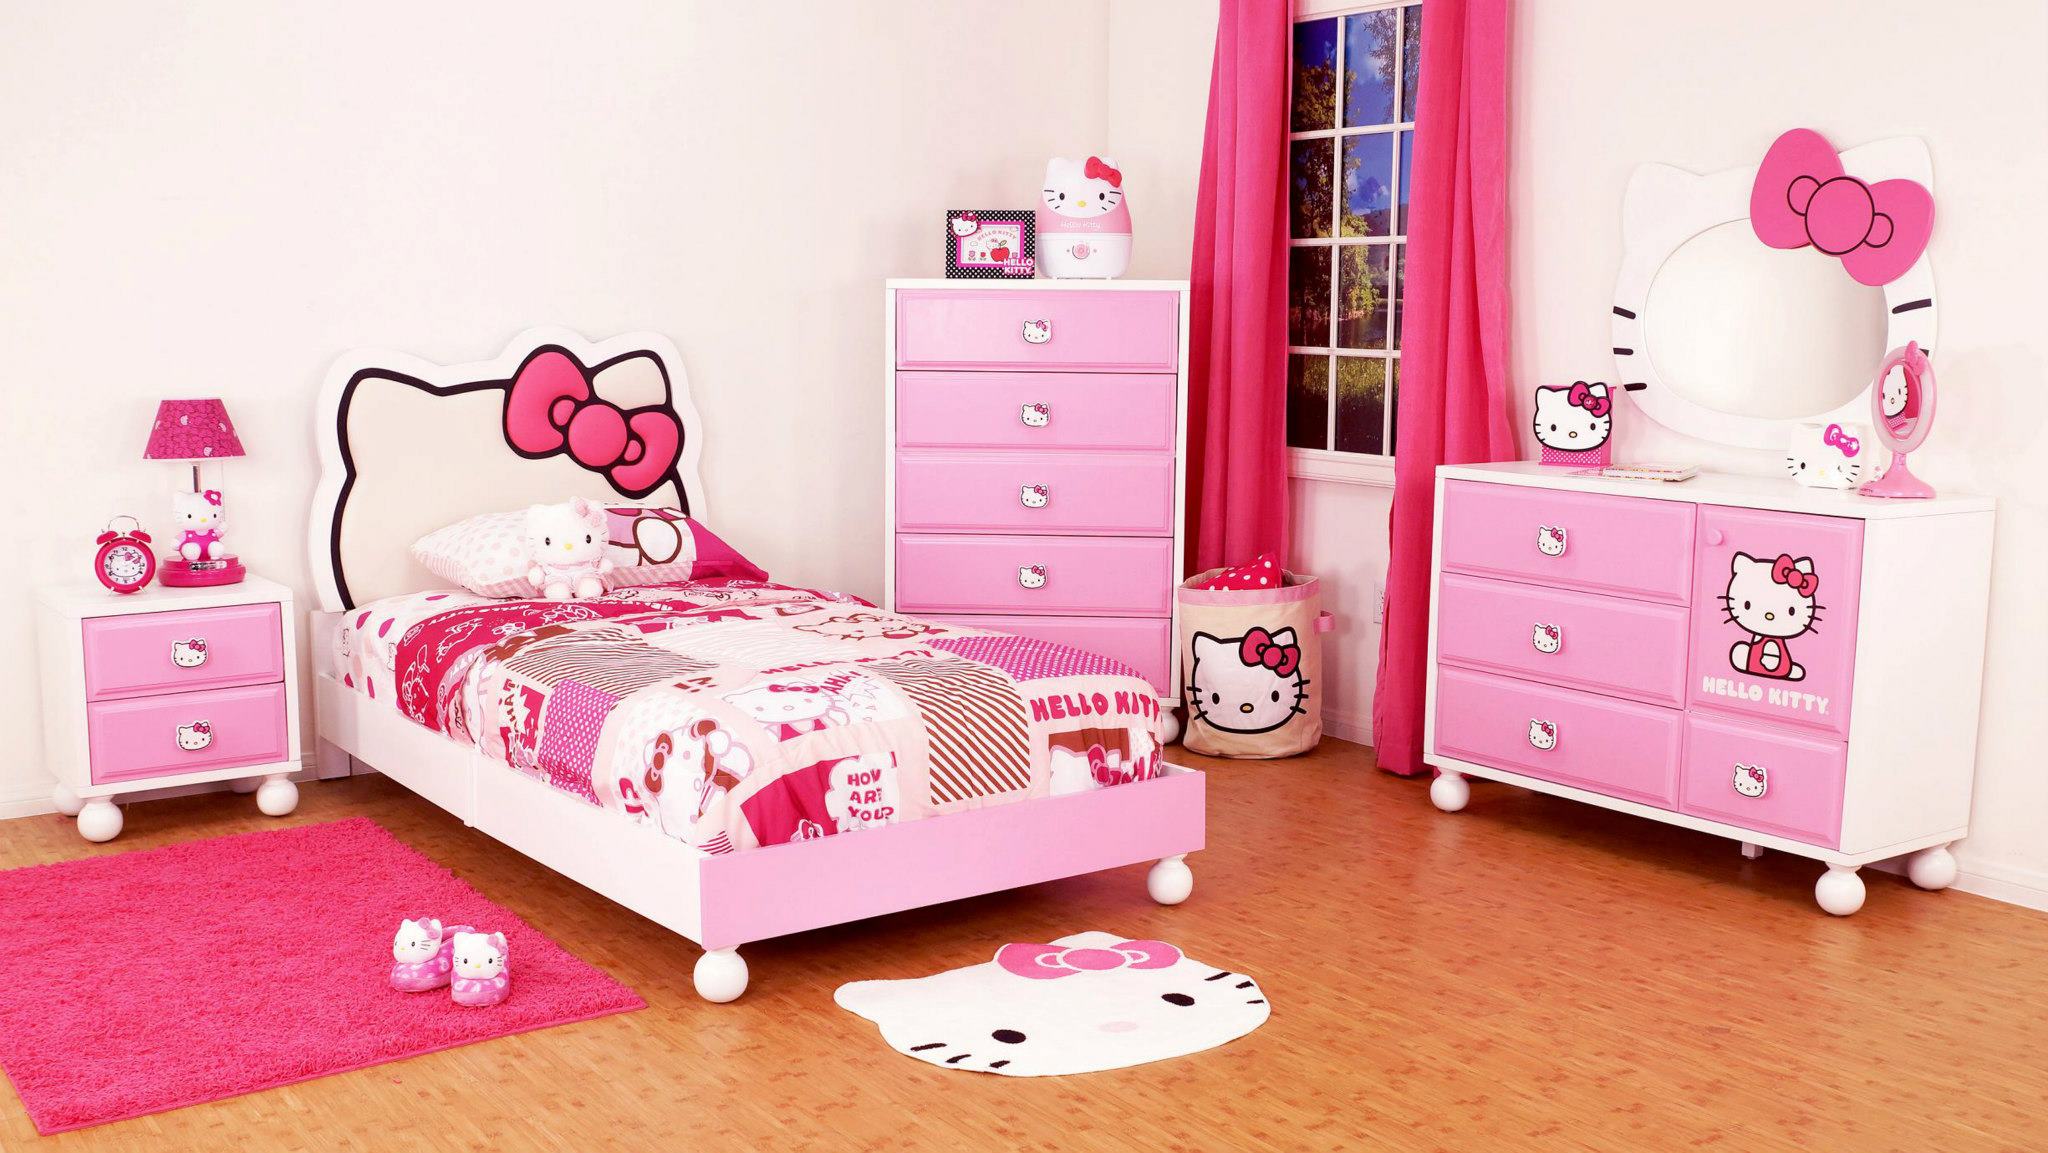 Cute Kids Bedrooms Ideas Bedroom Designs Furniture Best Stores Small Decorating Simple Good Home Interior Design Room Furniture With Hello Kitty Ornaments Bedroom